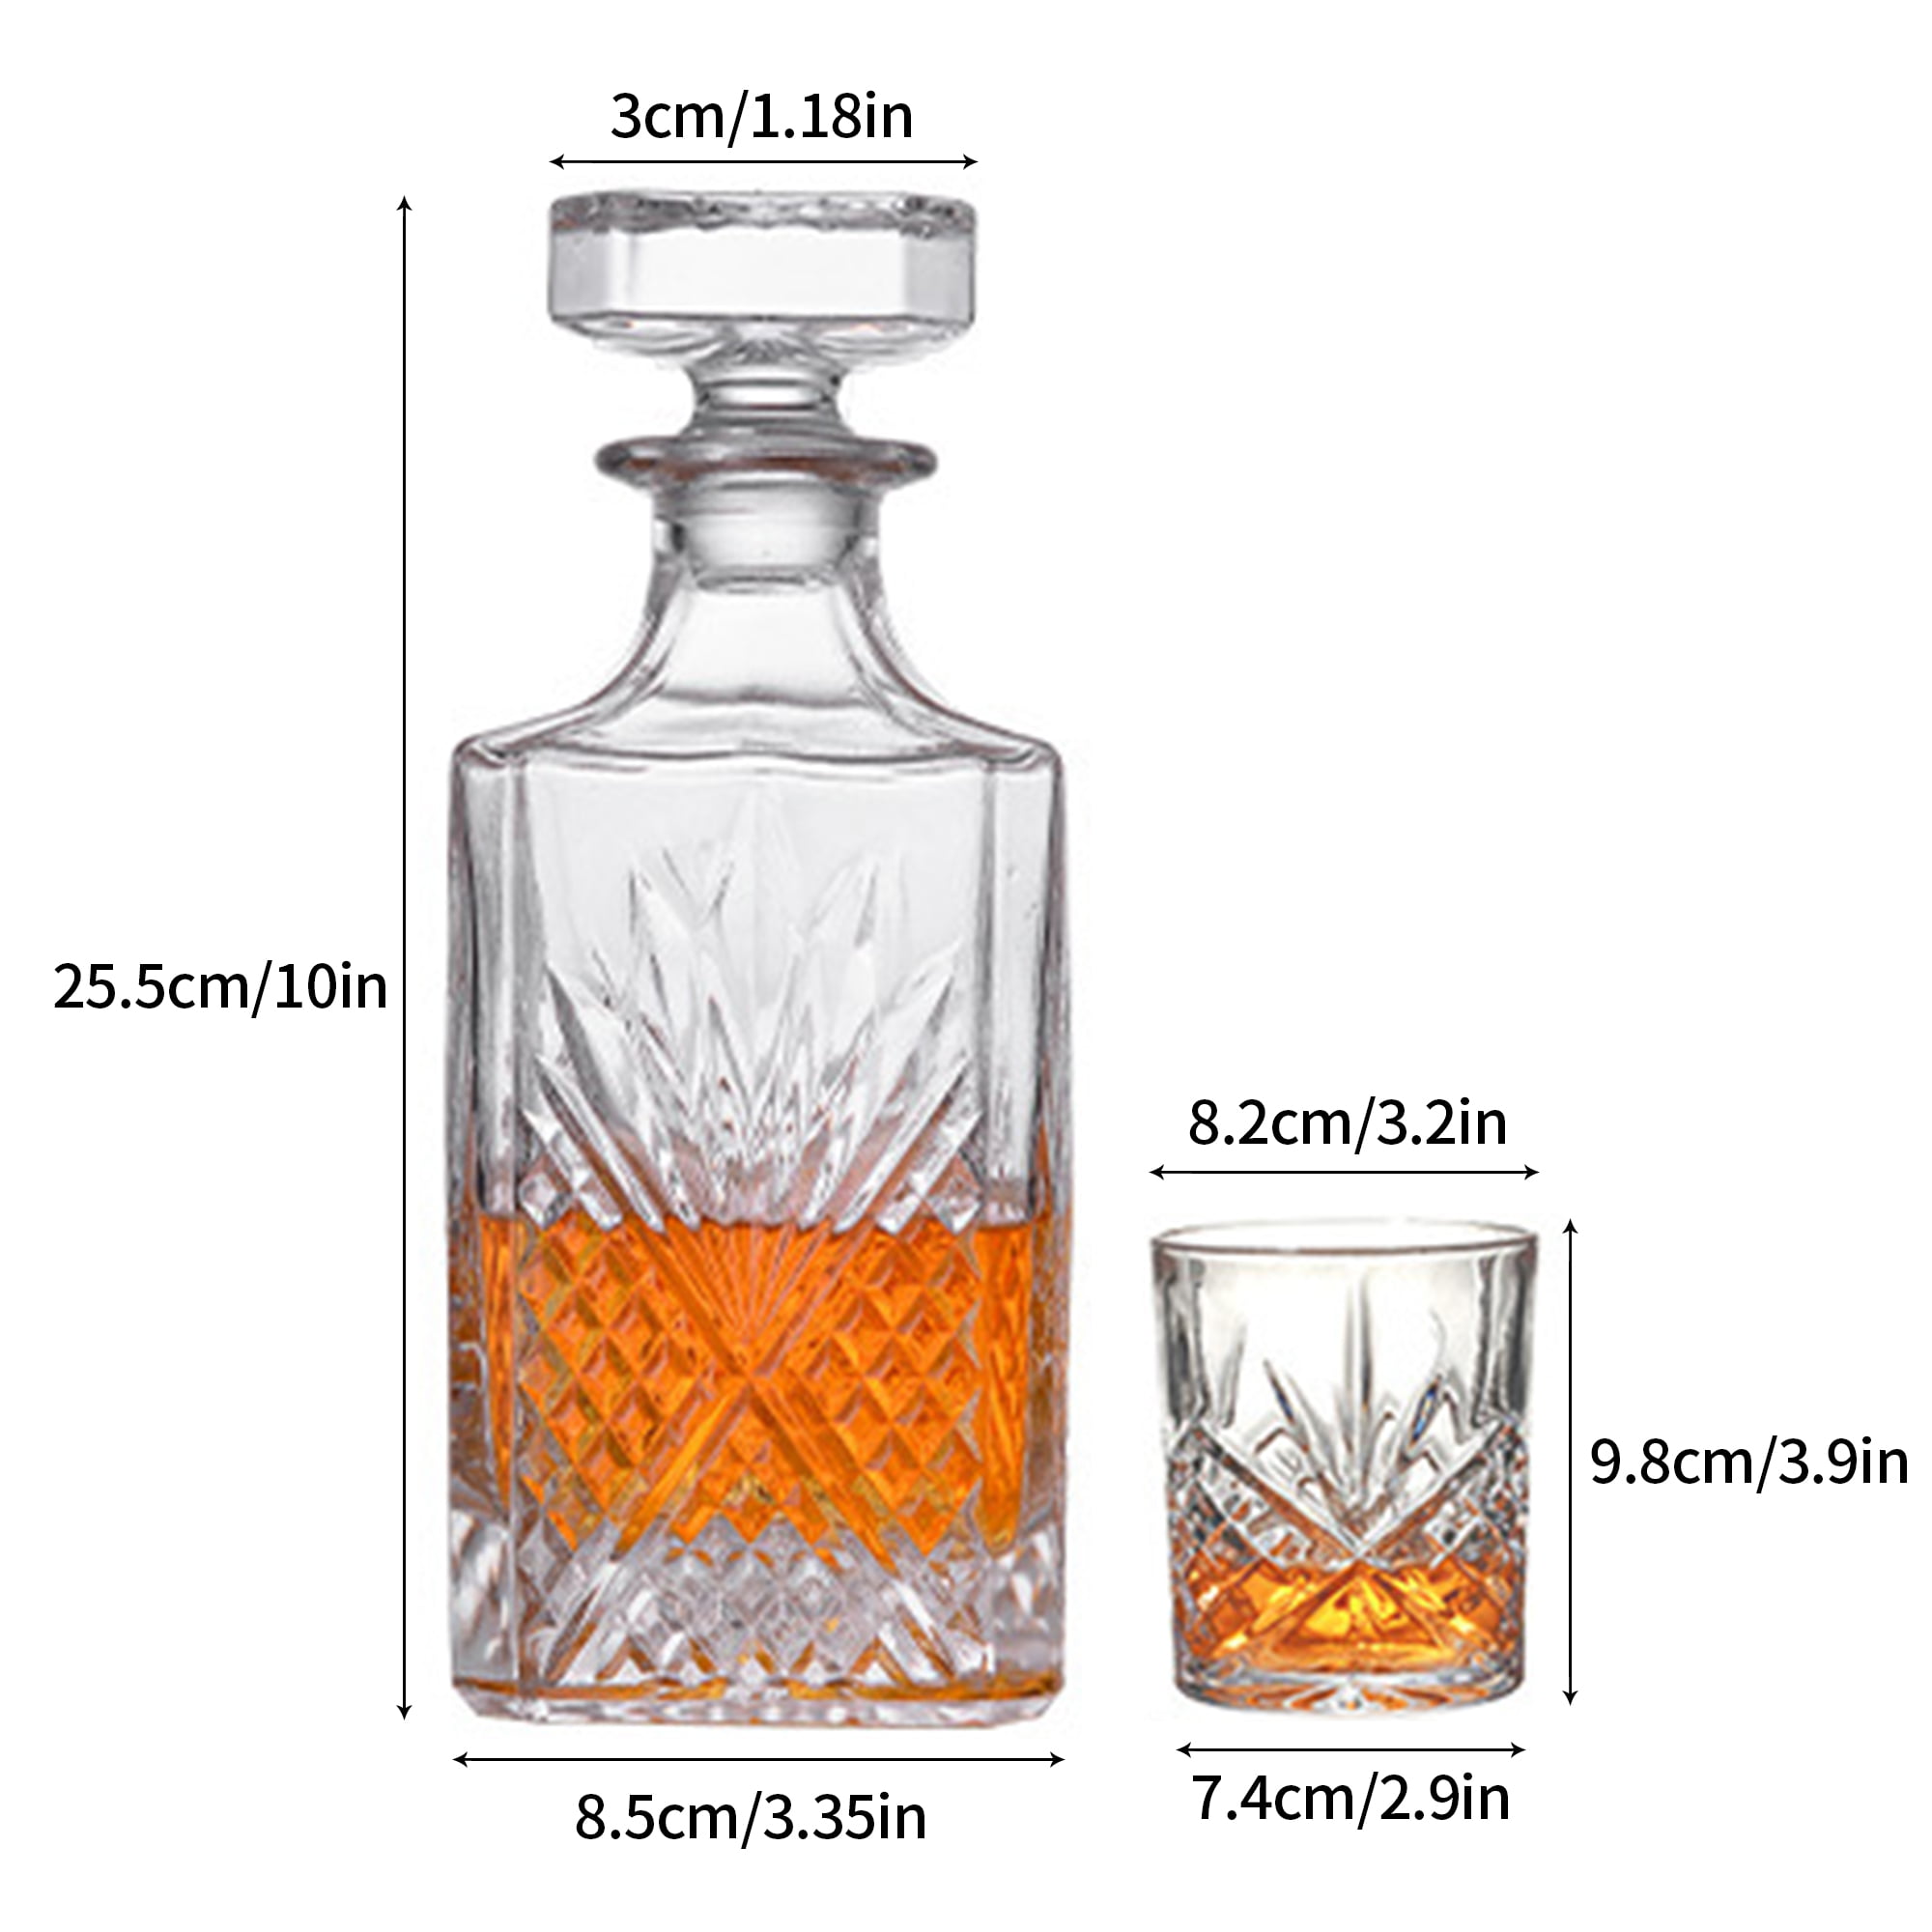 Whiskey Flask Carafe Decanter with 2 Glasses, Whiskey Glasses,  Whiskey Carafe for Wine, Liquor, Scotch, Bourbon, Brandy - 750ML: Old  Fashioned Glasses